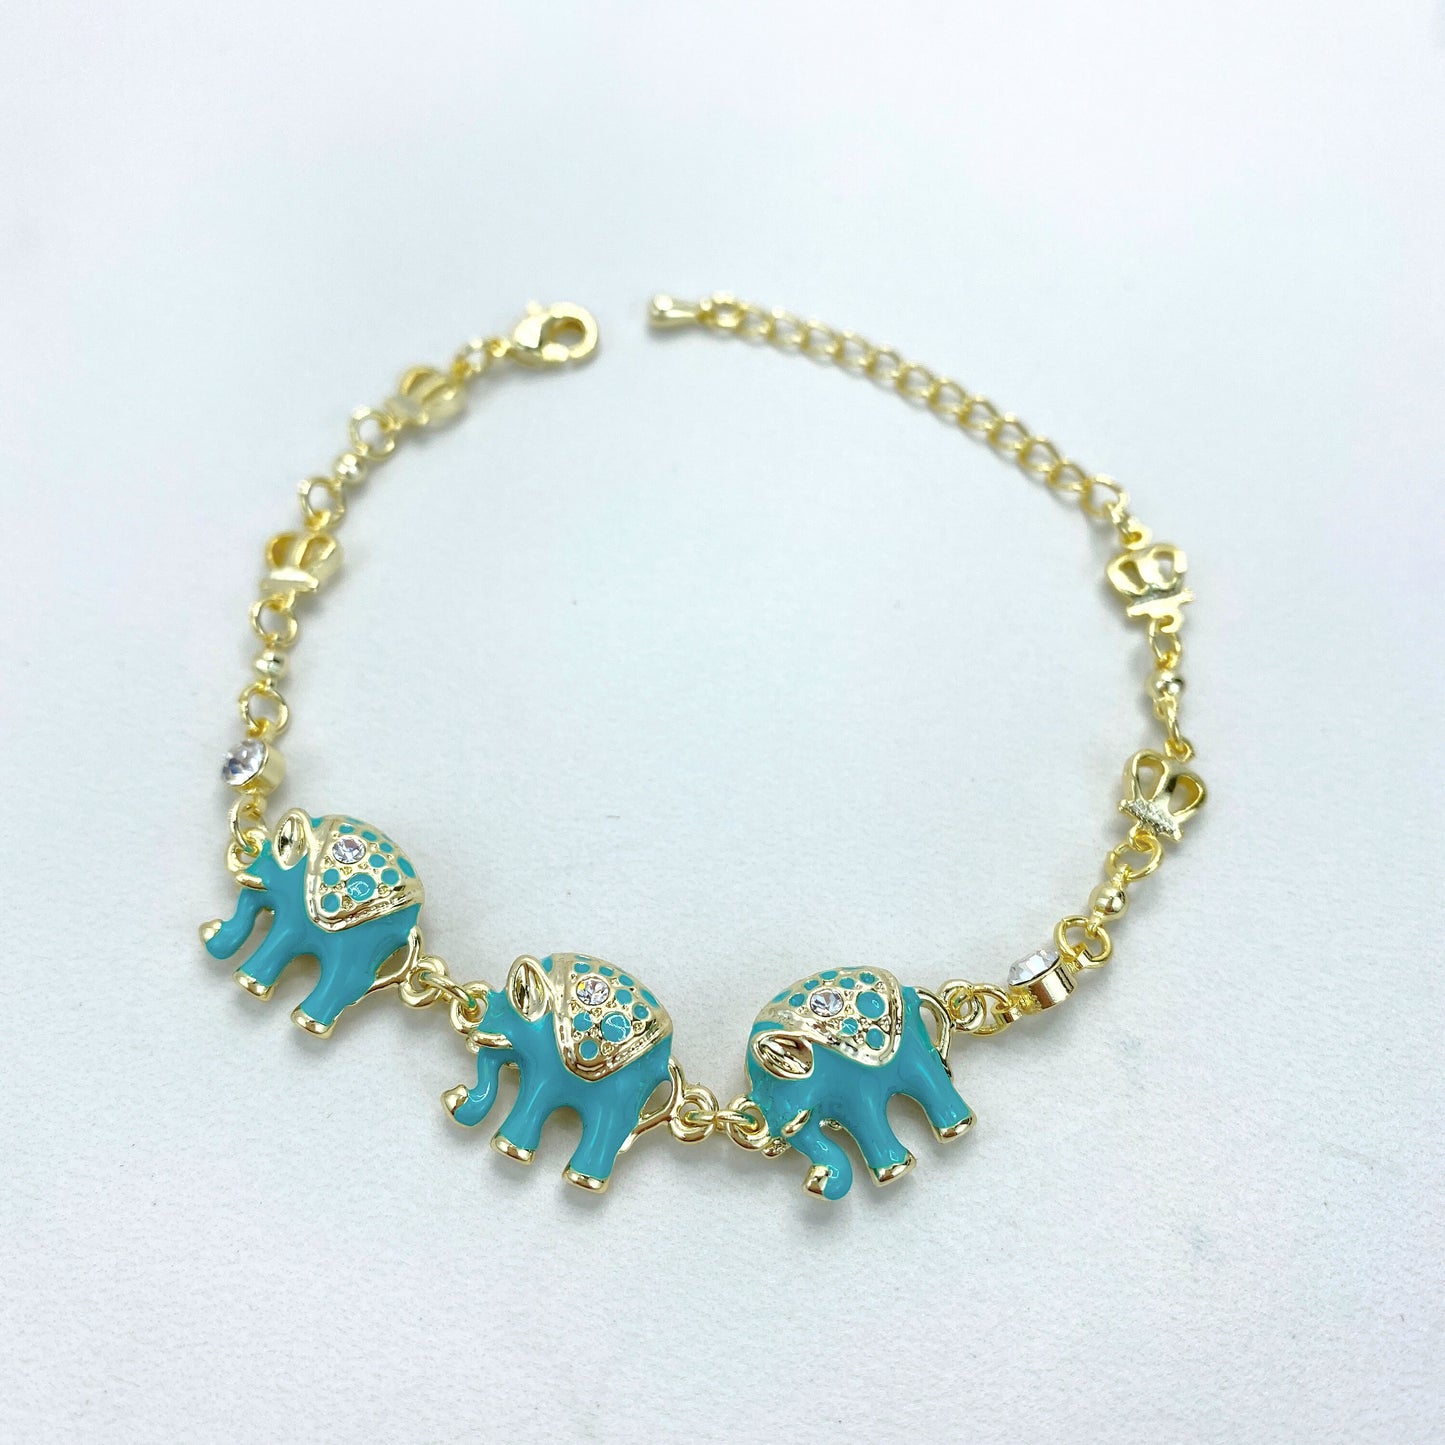 18k Gold Filled Cubic Zirconia and Mini Crown Details and Elephants Charm in Red, Blue or Black Bracelet Wholesale Jewelry Supplies